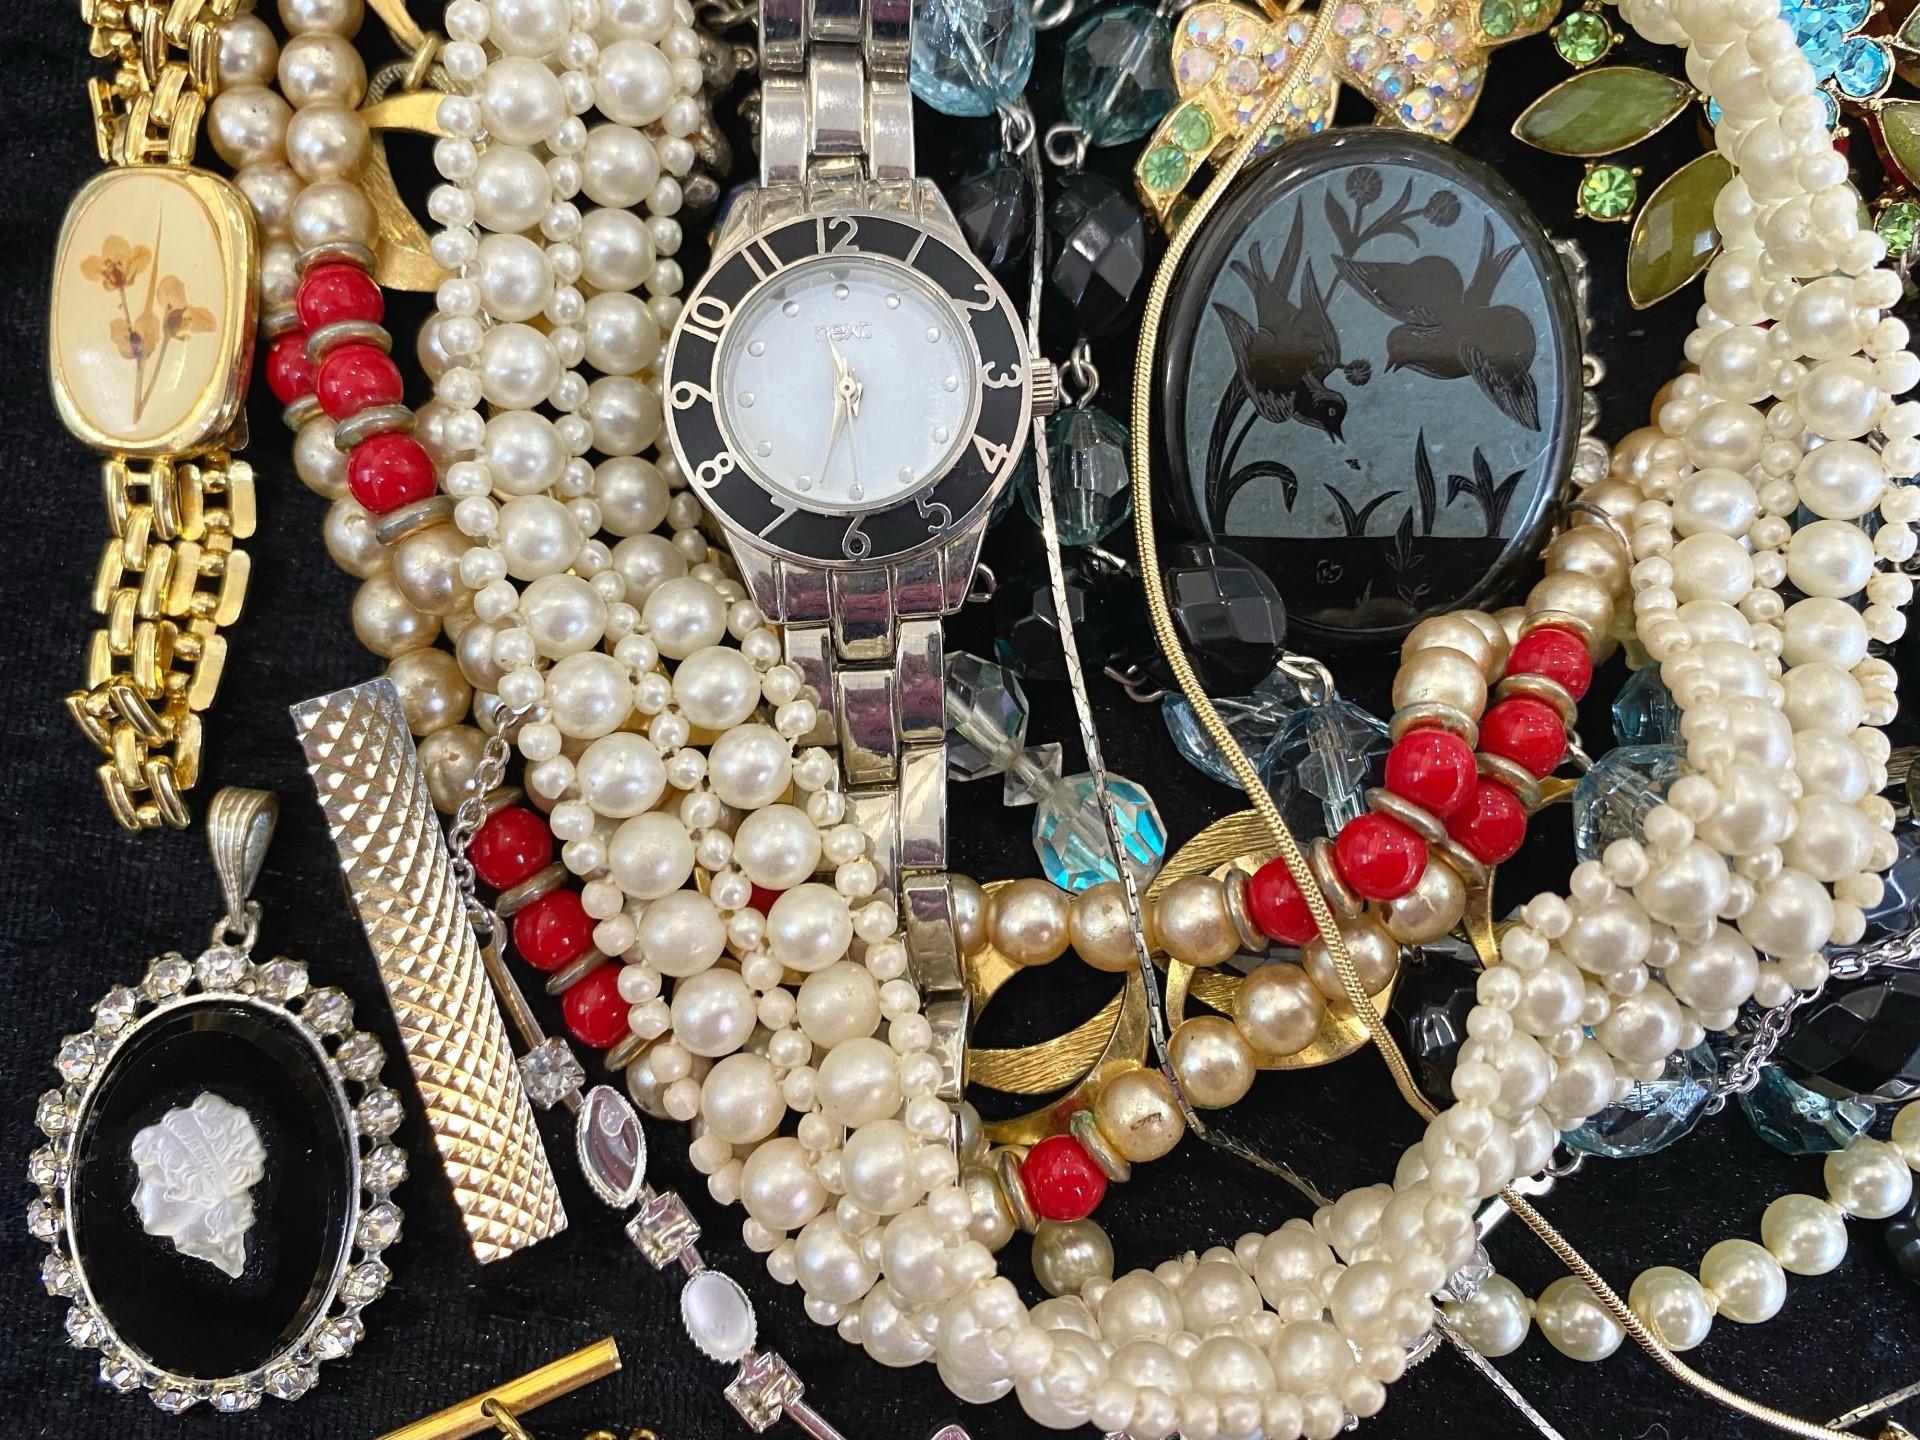 Collection of Vintage Costume Jewellery, comprising brooches, pearls, bangles, beads, watches, etc. - Image 4 of 4